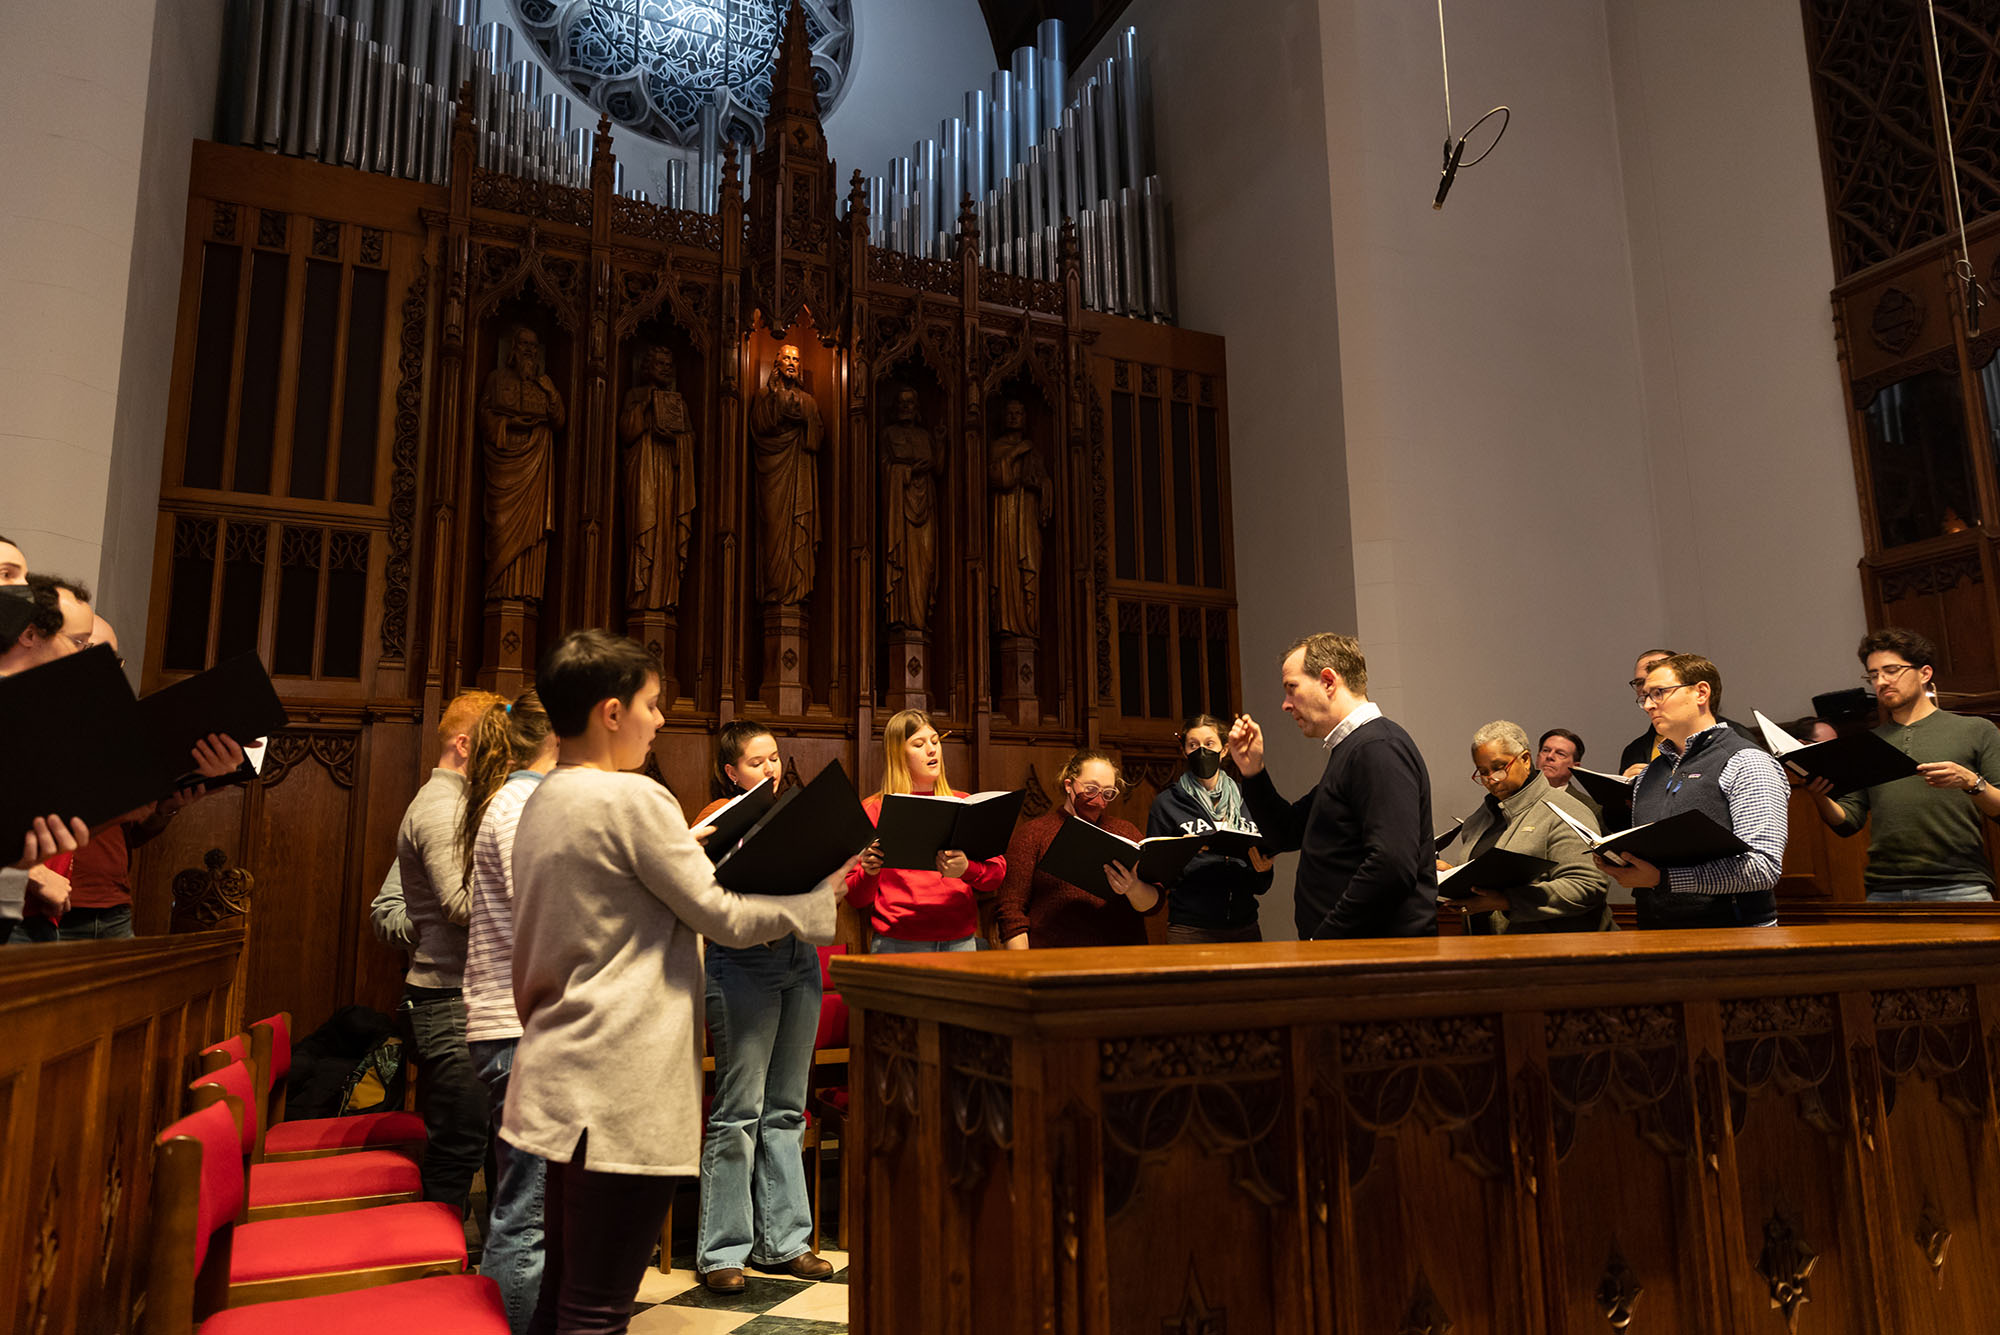 Photo: The Marsh Chapel choir practices on Monday, December 5, 2022. A group of people standing in a chapel hold music books and sing. A conductor stands in the middle of the half circle and leads.